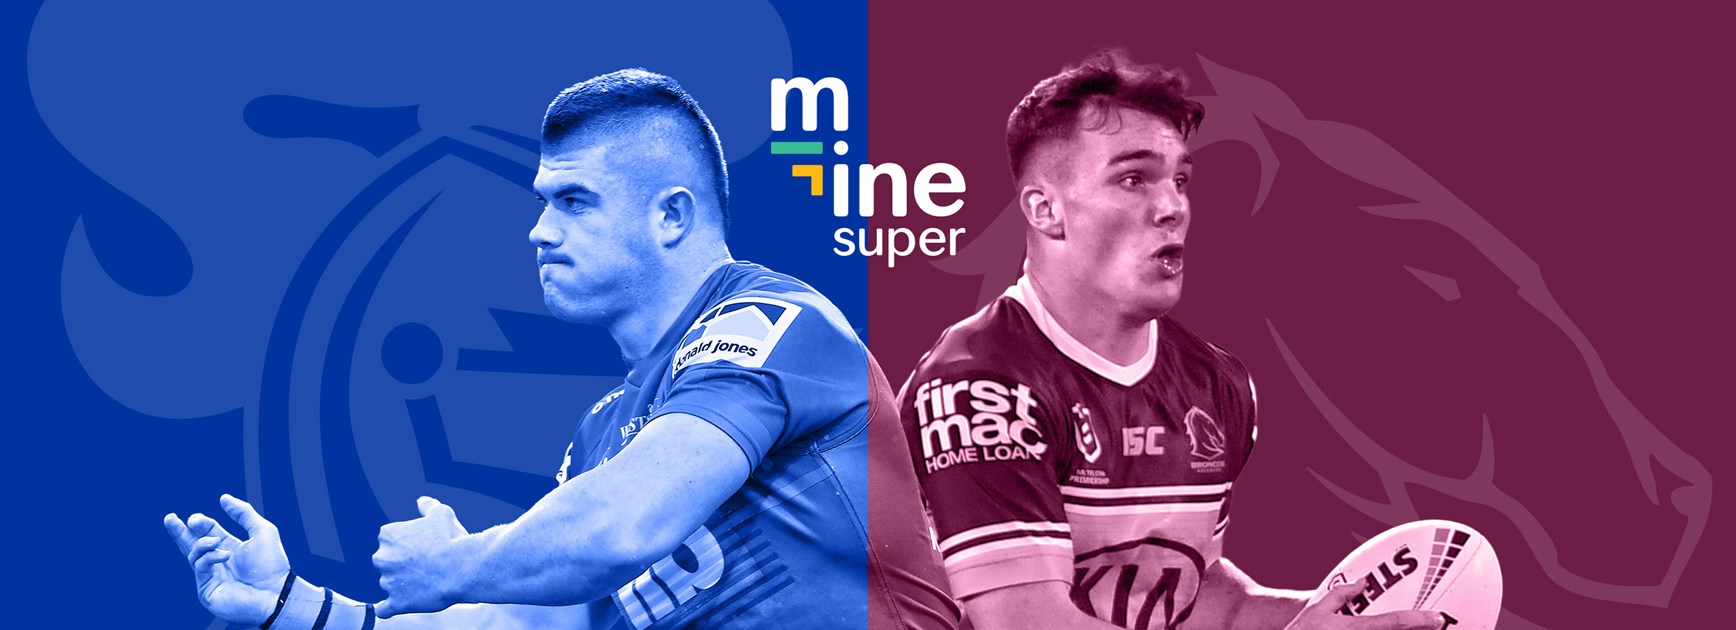 Rd 6 Ultimate Guide: Luke confirmed to debut for Broncos